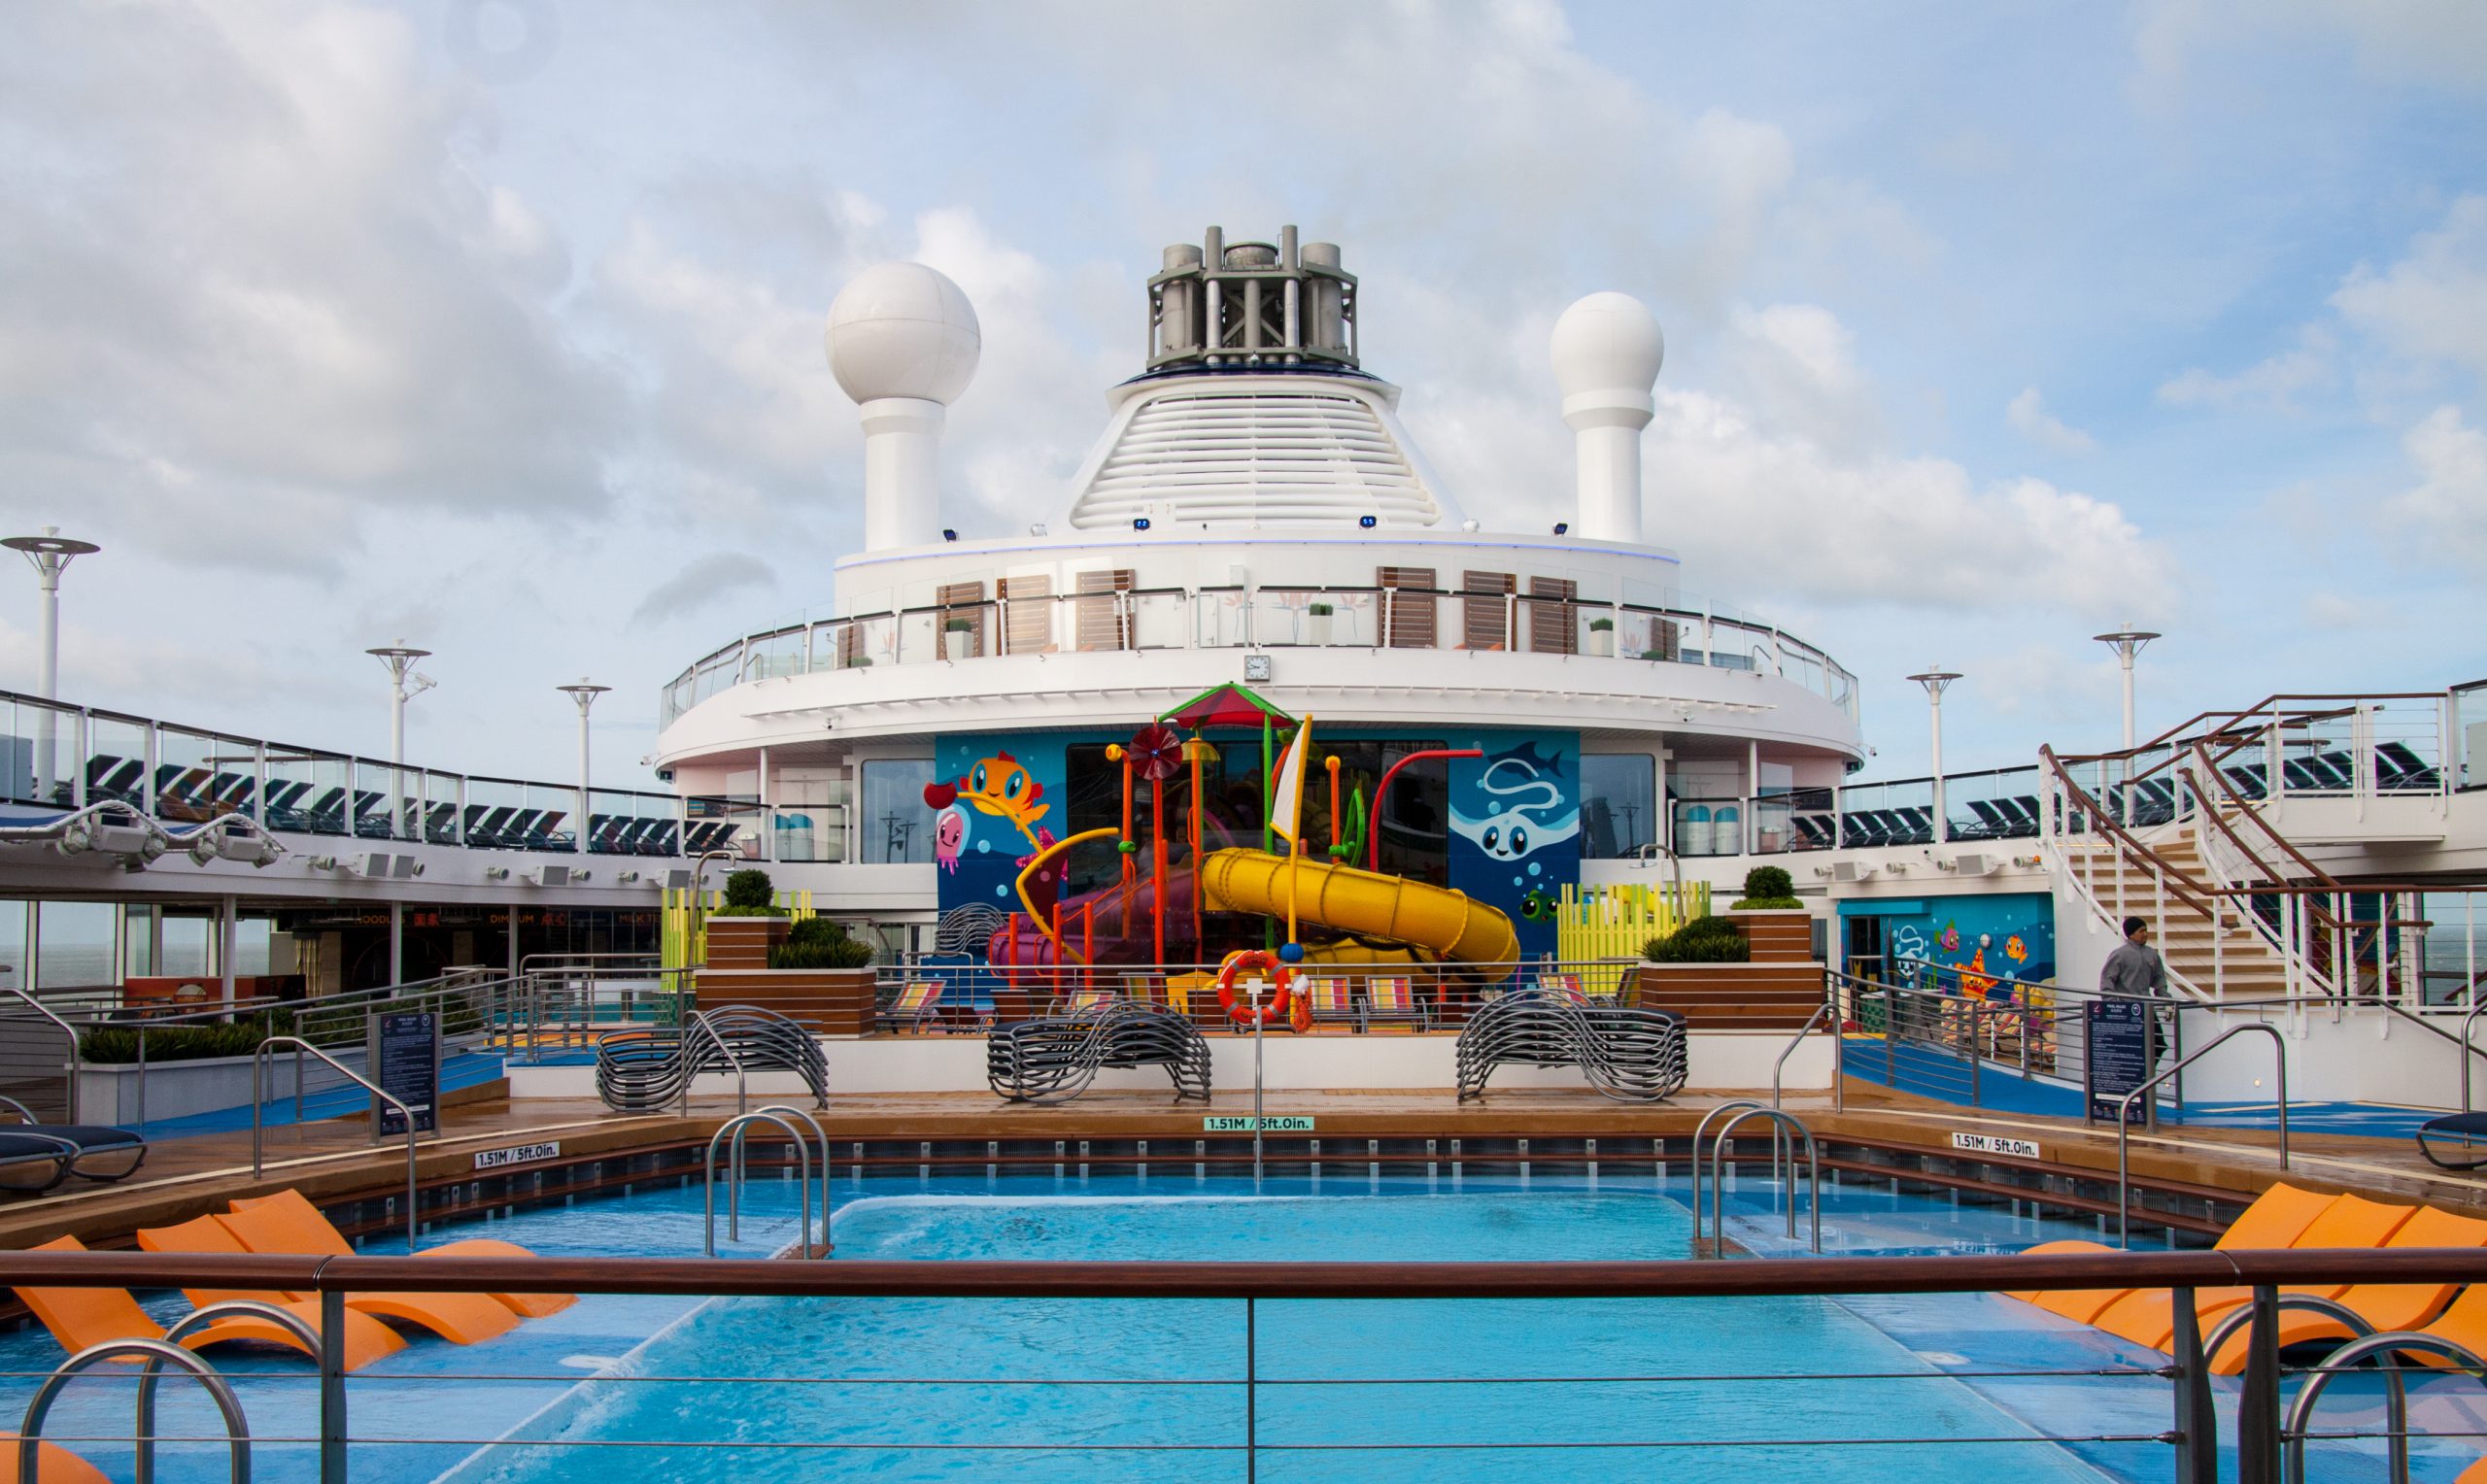 The first review of Royal Caribbean's Ovation of the Seas